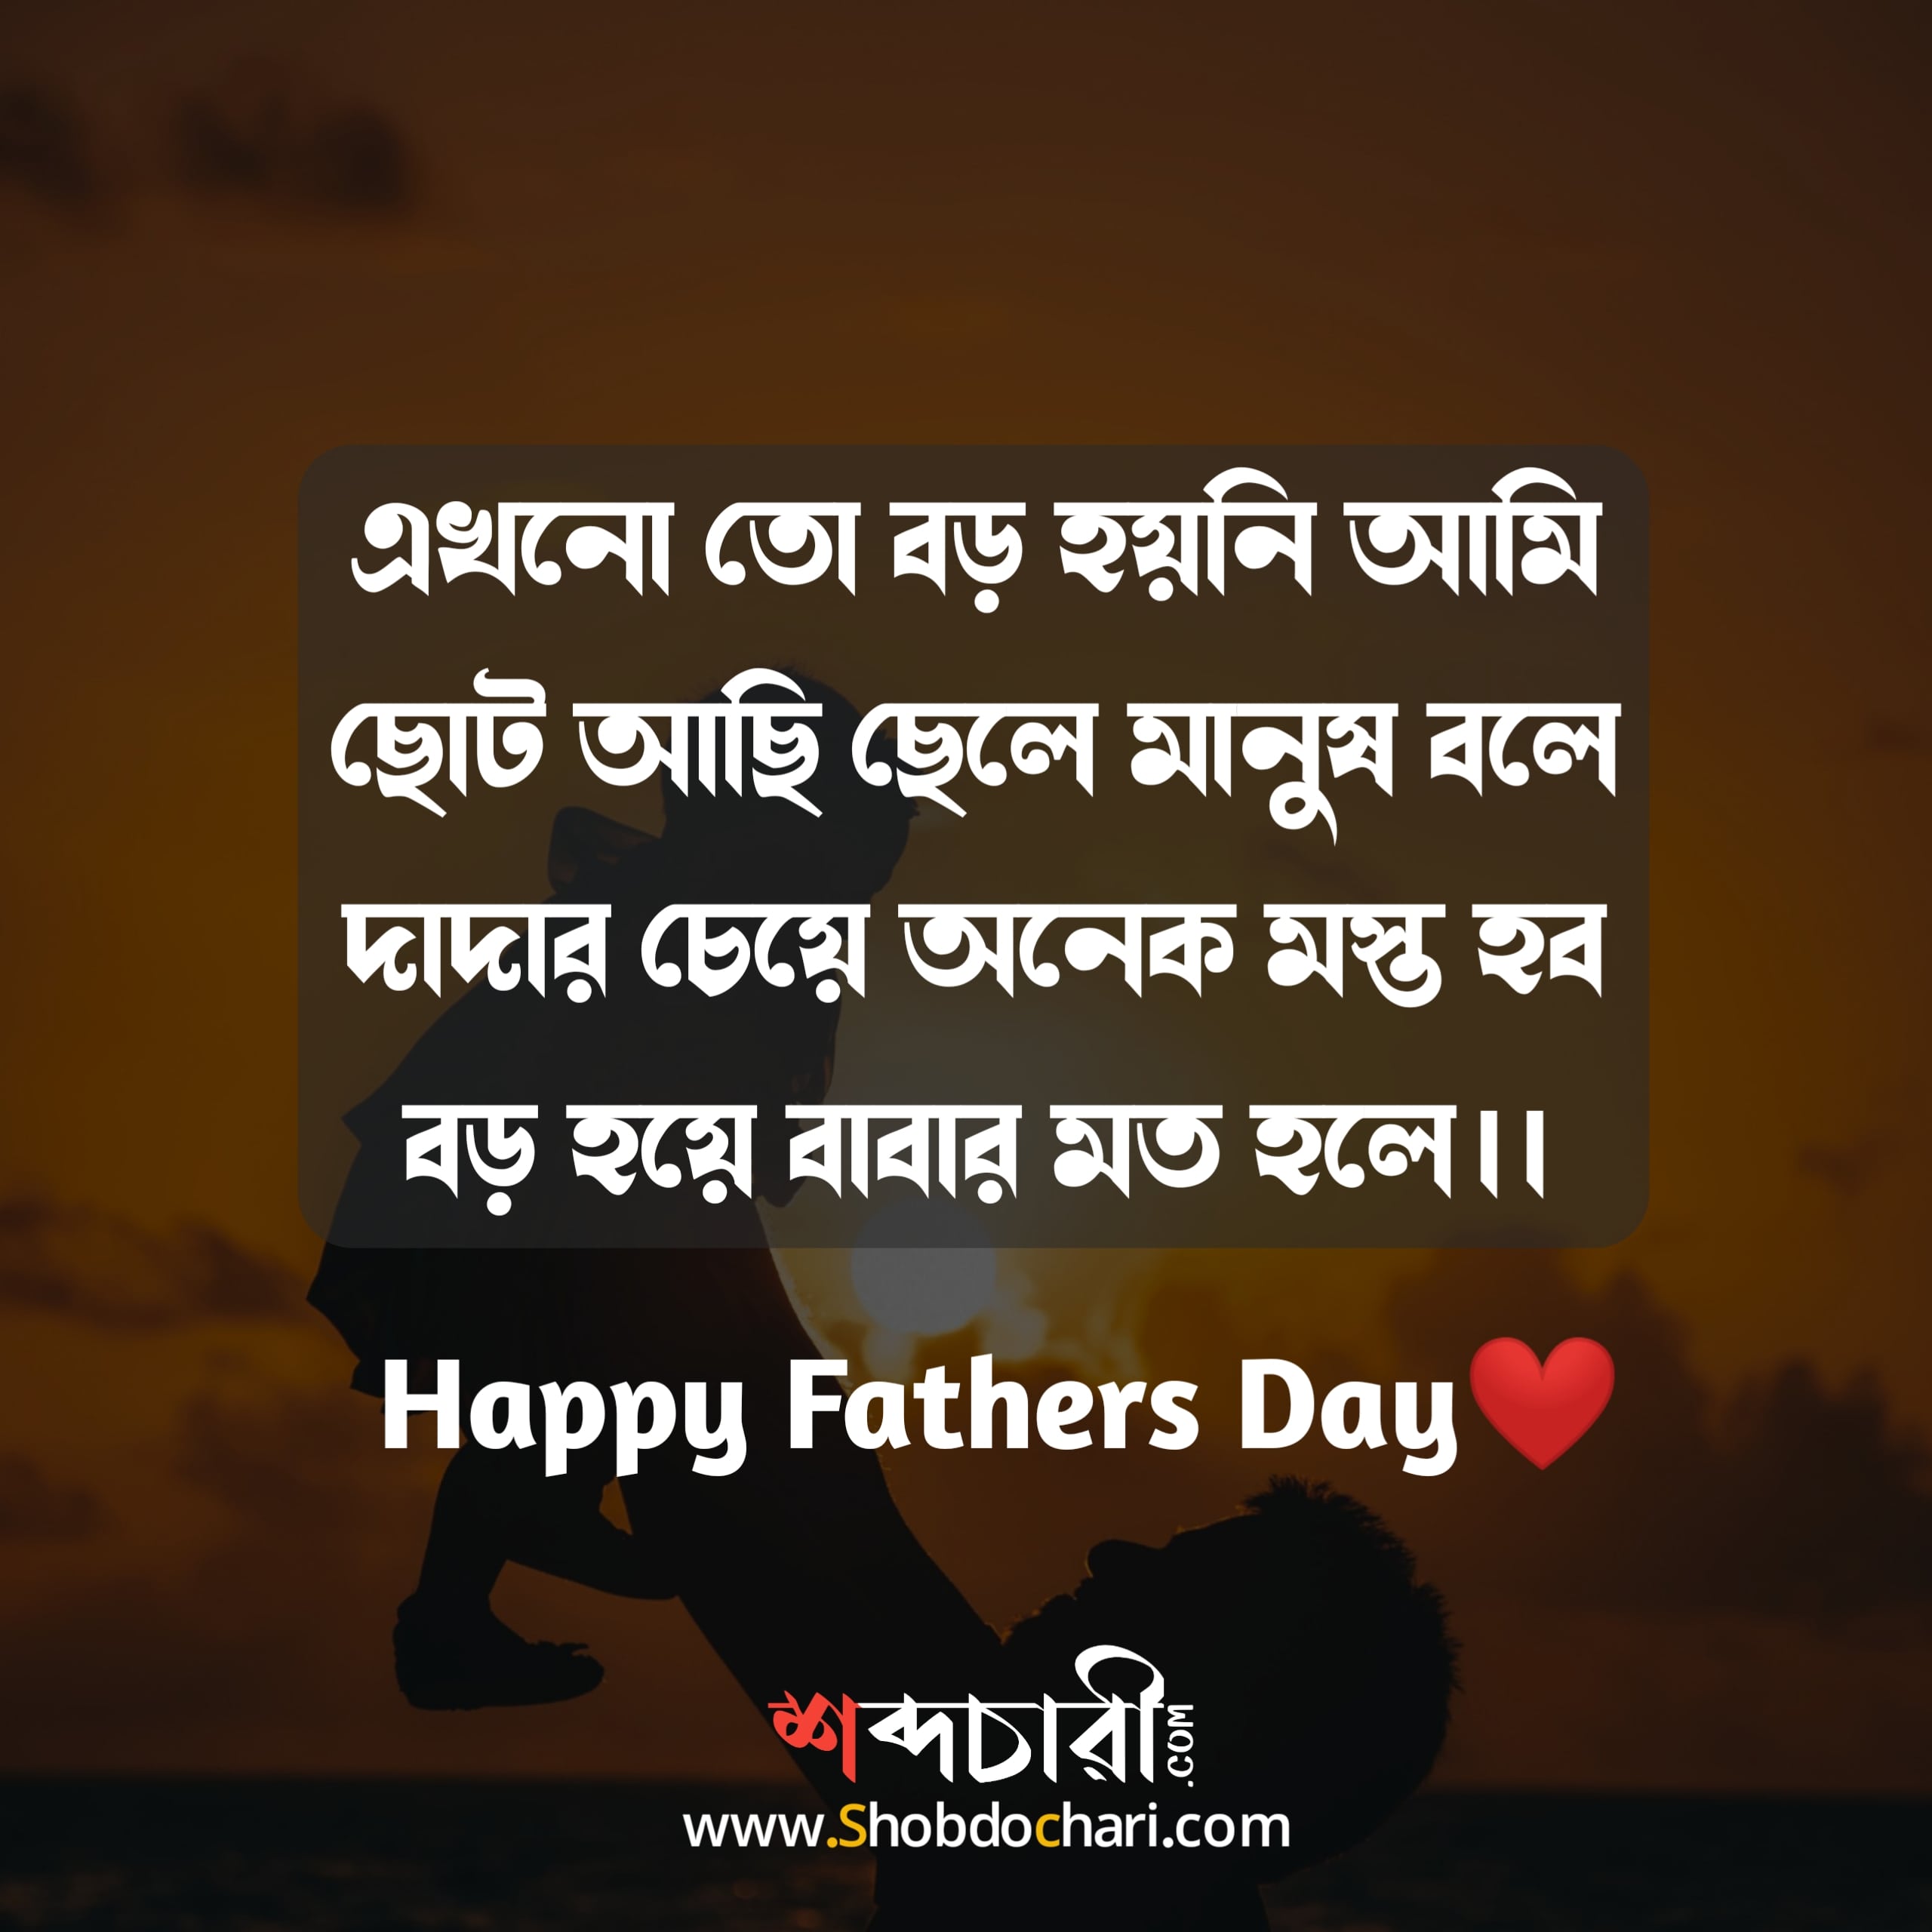 Happy Fathers Day Wishes in bengali 2 min